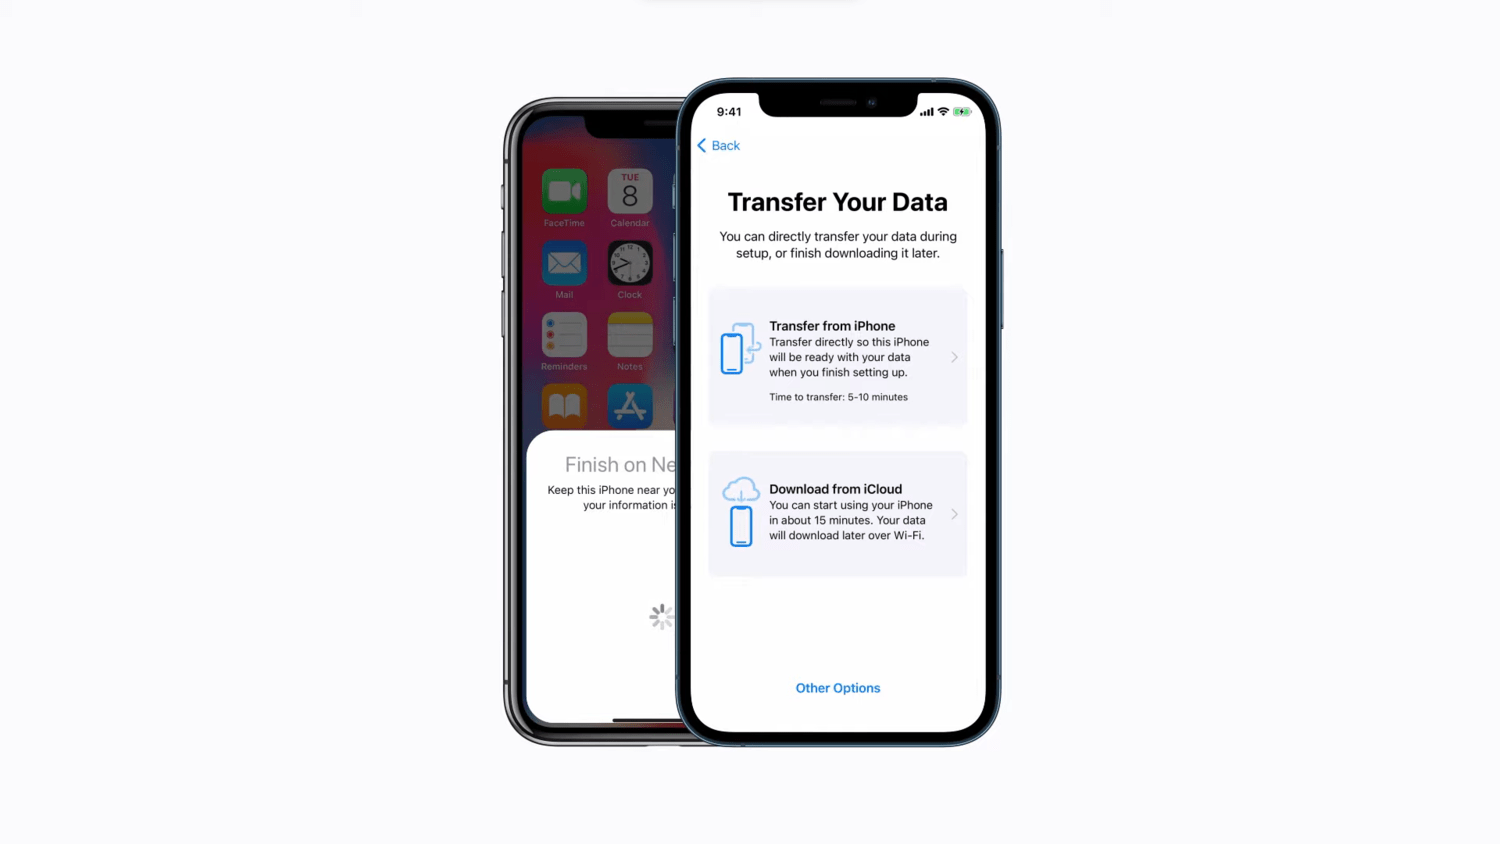 Tap on Transfer from iPhone option